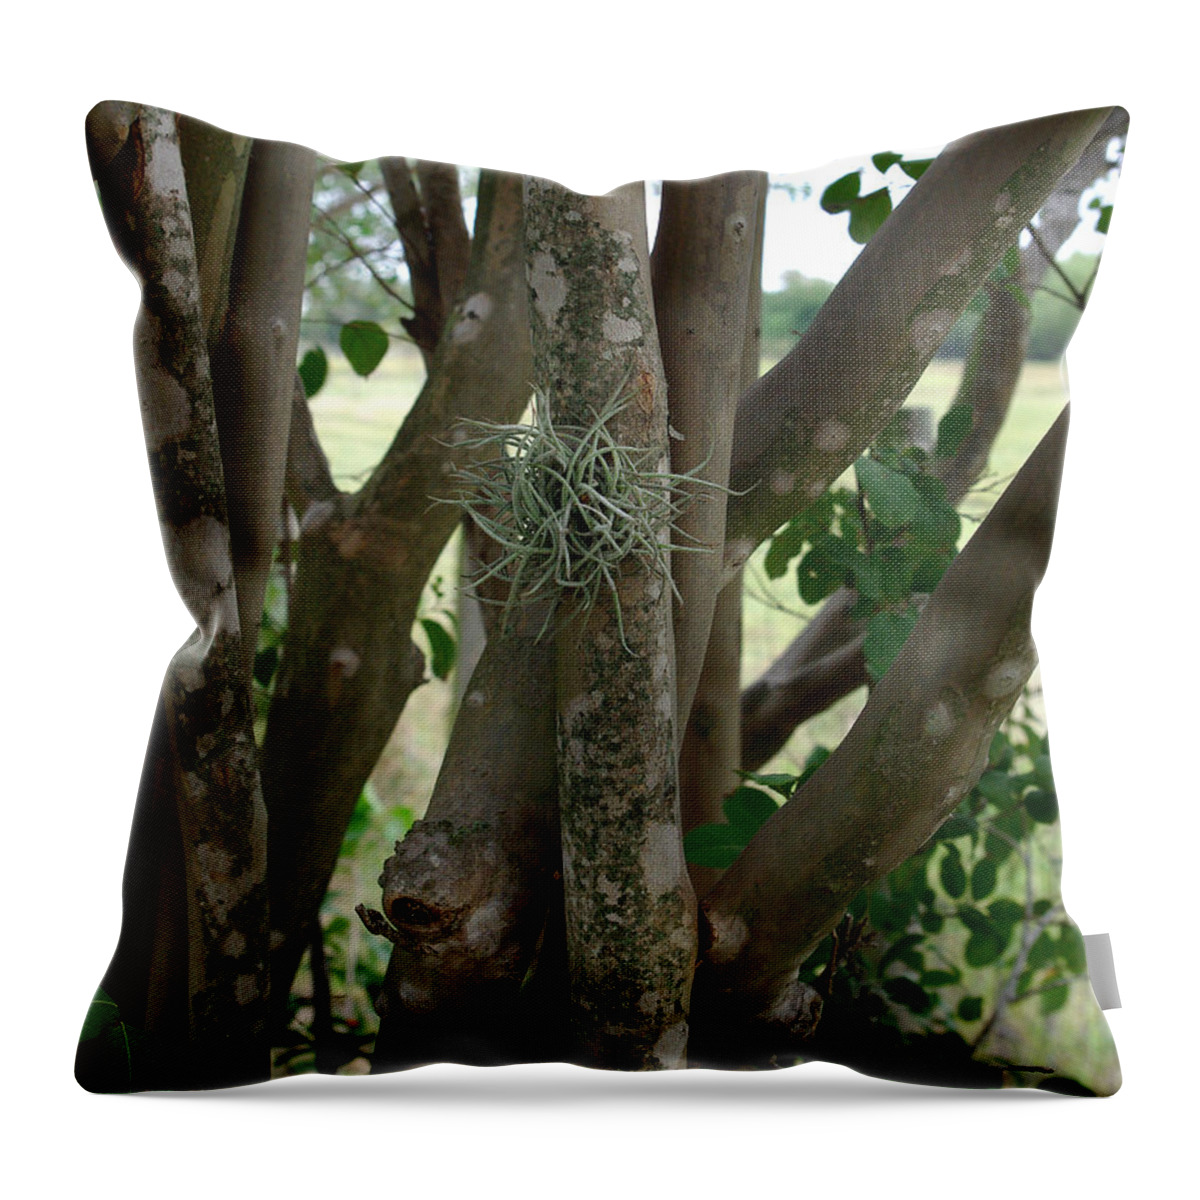 Crape Myrtle Throw Pillow featuring the photograph Crape Myrtle Growth Ball by Peter Piatt